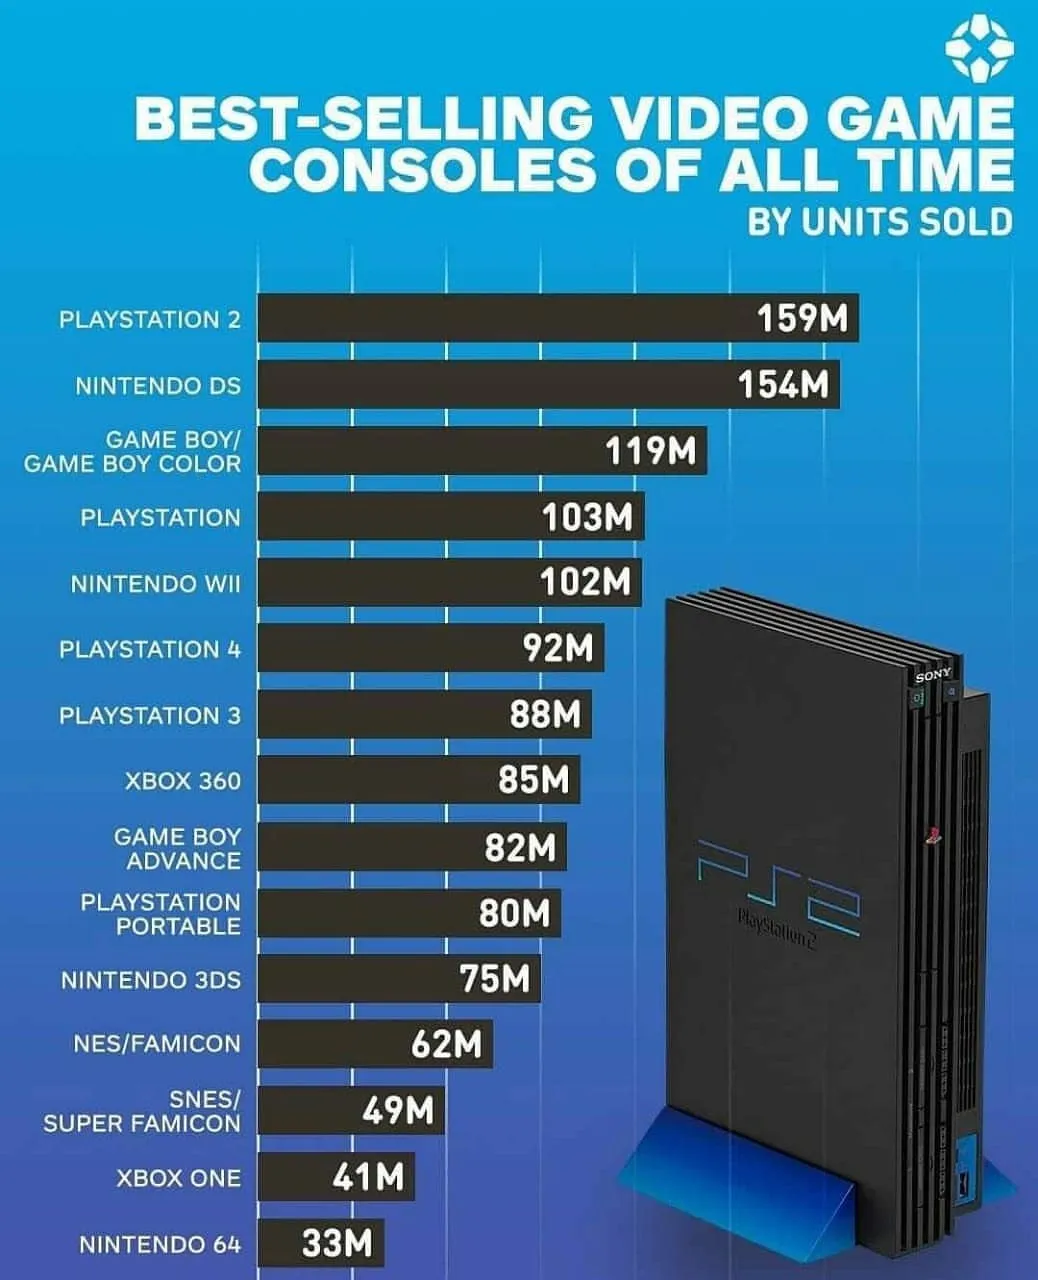 Most sold consoles